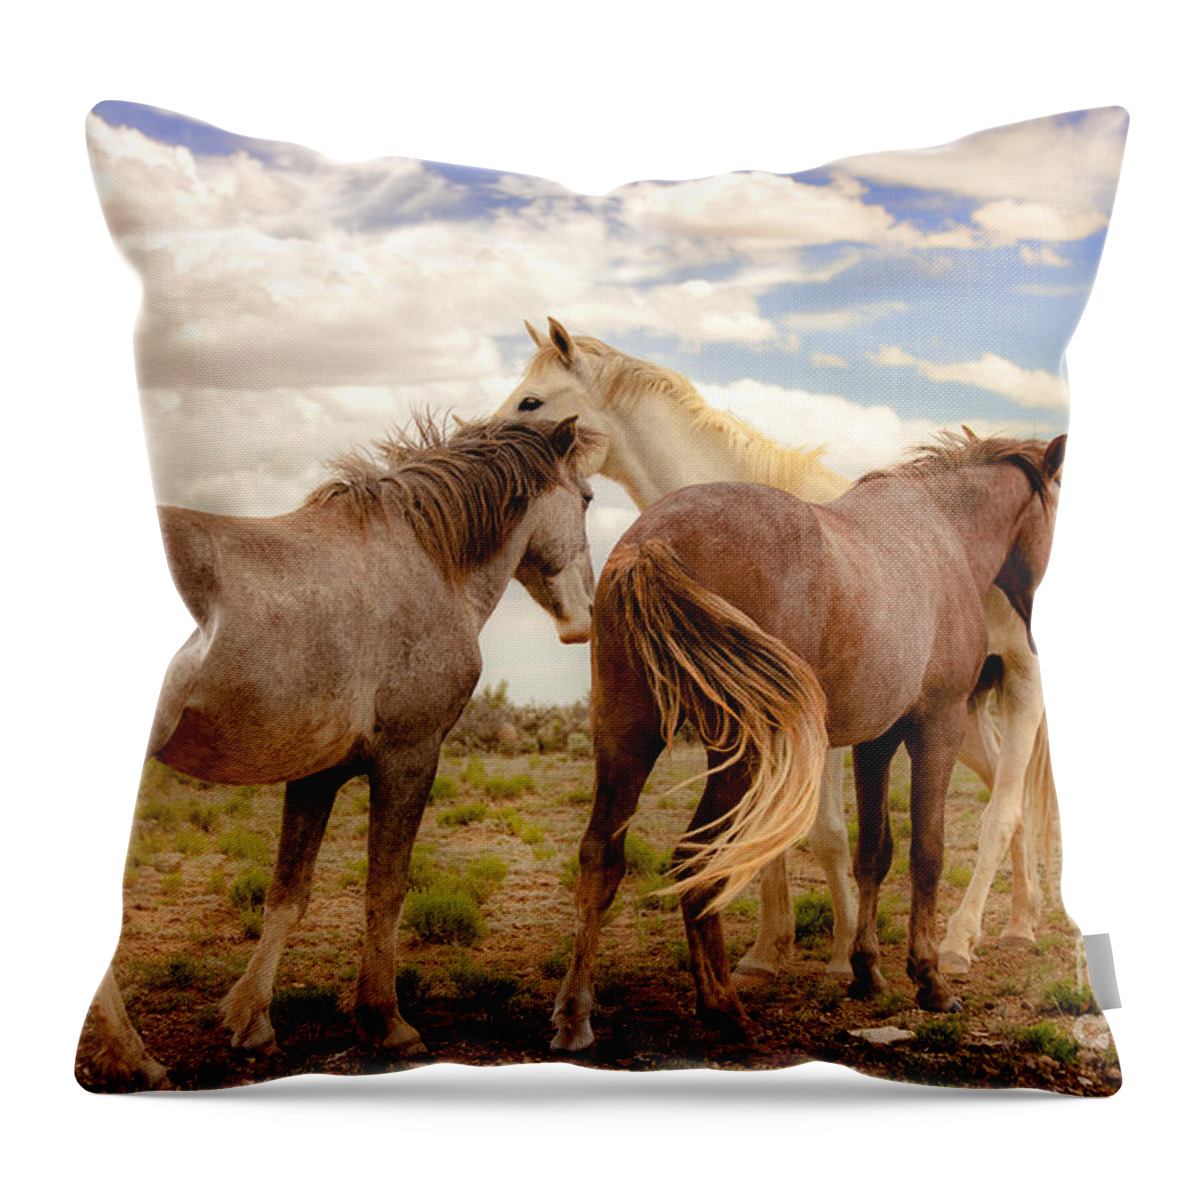 Southwest Wild Horses With White Stallion On Navajo Indian Reservation In New Mexico Throw Pillow featuring the photograph Wild Horses With White Stallion On Navajo Indian Reservation by Jerry Cowart